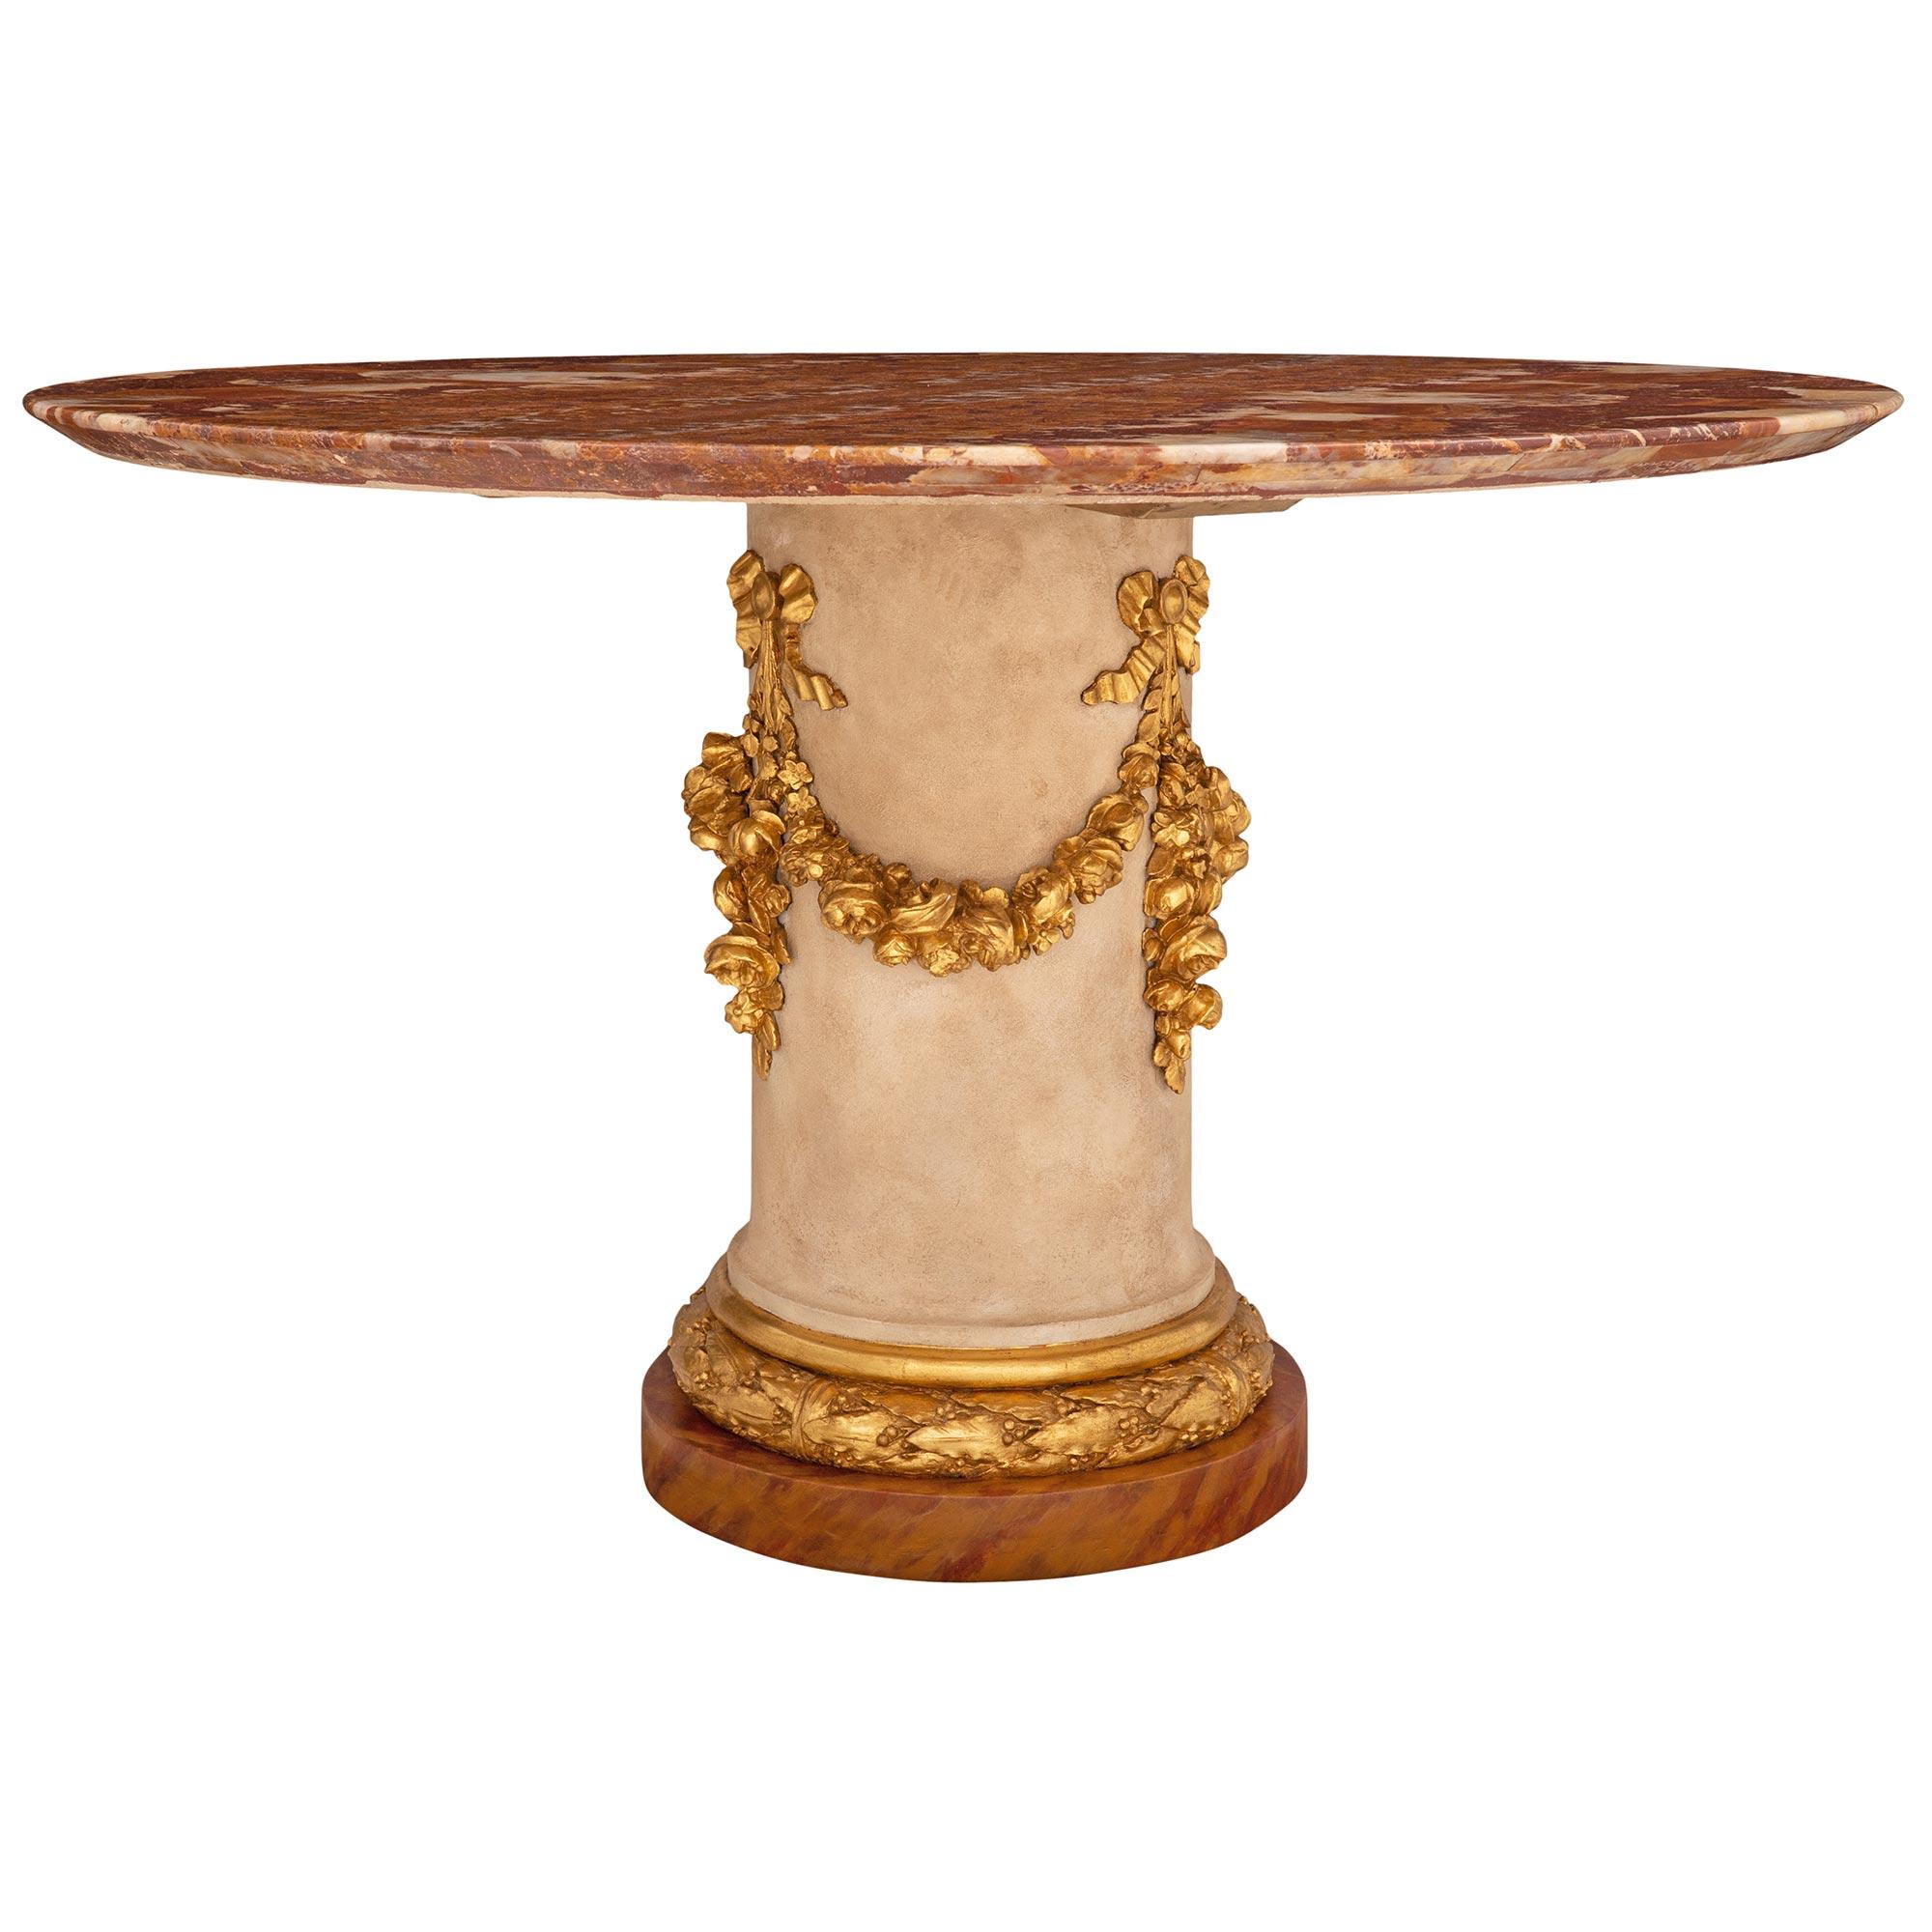 Italian 19th Century Onyx, Faux Marble, and Giltwood Center/Dining Table For Sale 1